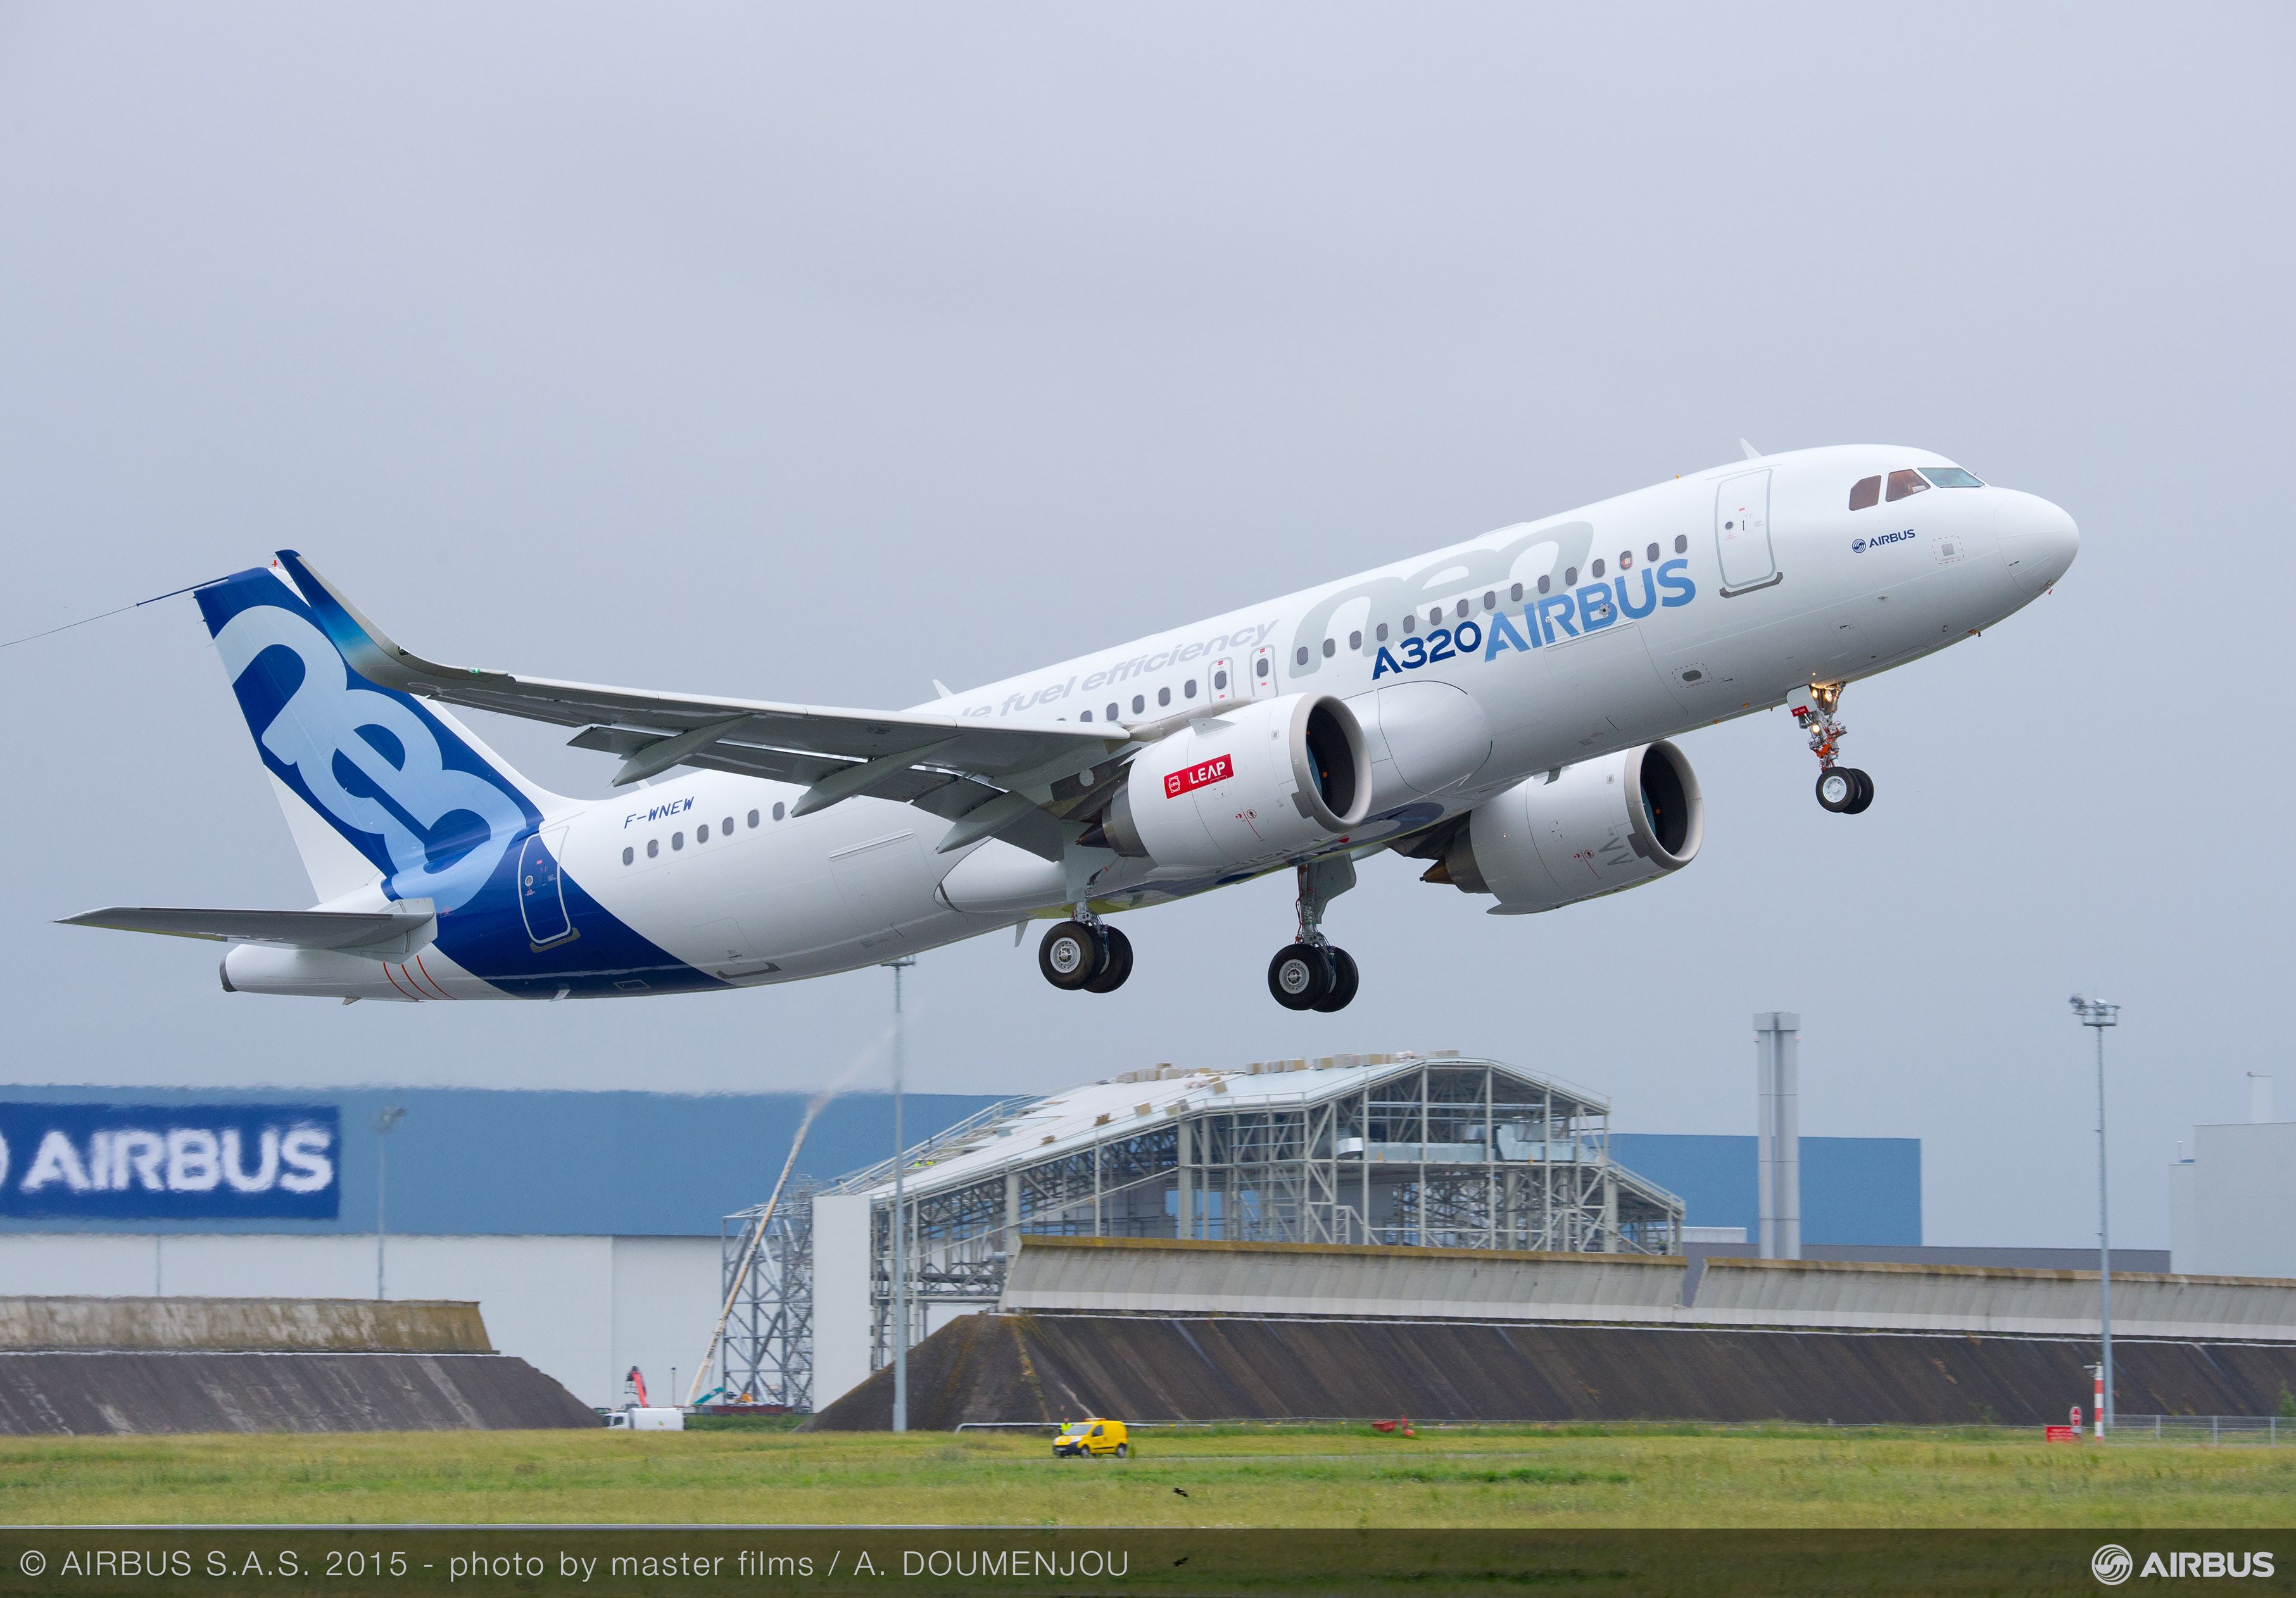 BAA Training and L3Harris sign a new A320 FFS agreement